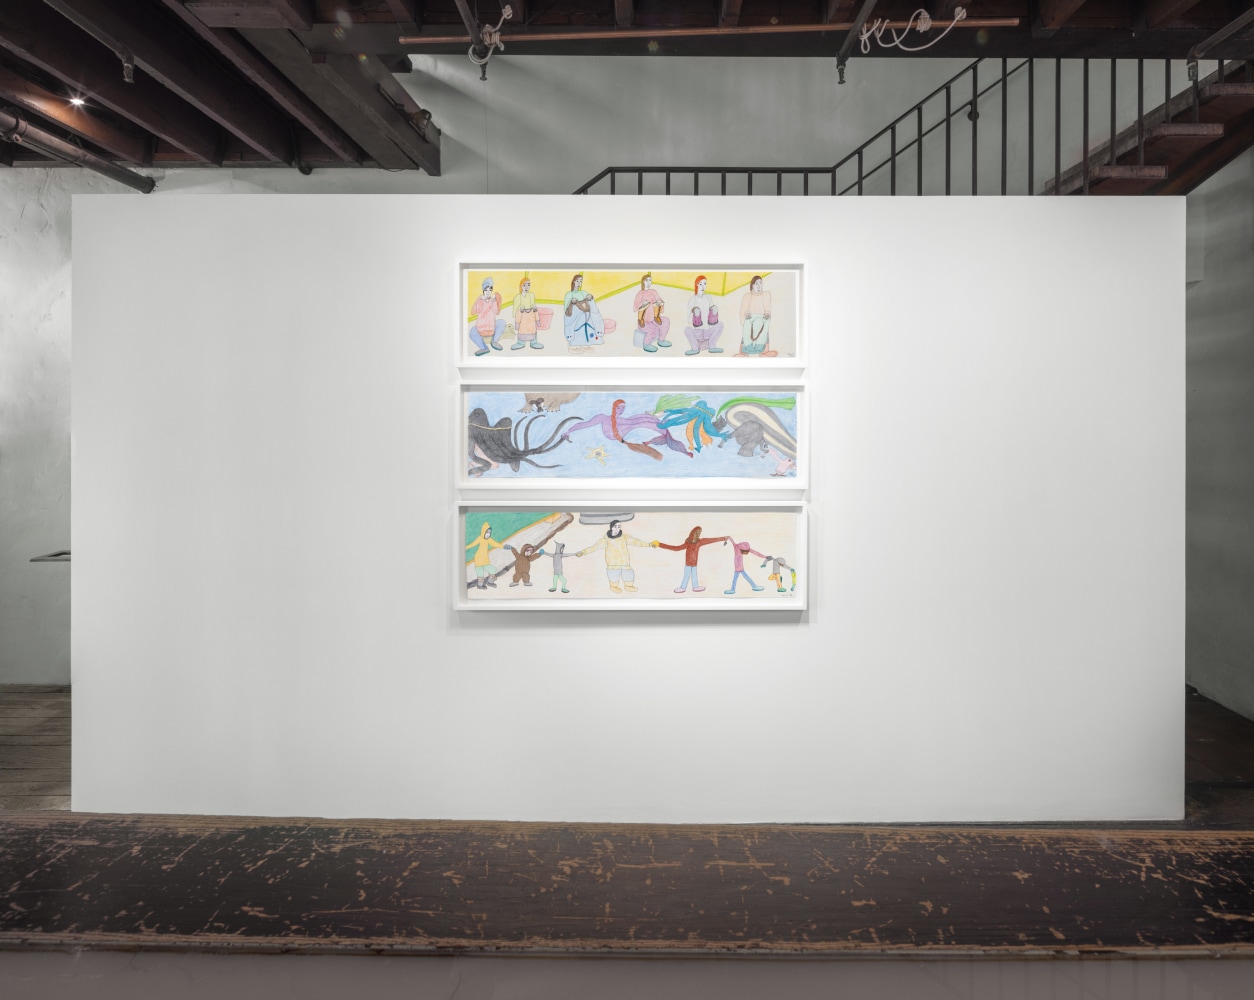 Installation view of Shuvinai Ashoona's &quot;Looking Out, Looking In&quot; exhibition with three works of art suspended one on top of the other. Done in colored pencil and ink on paper.